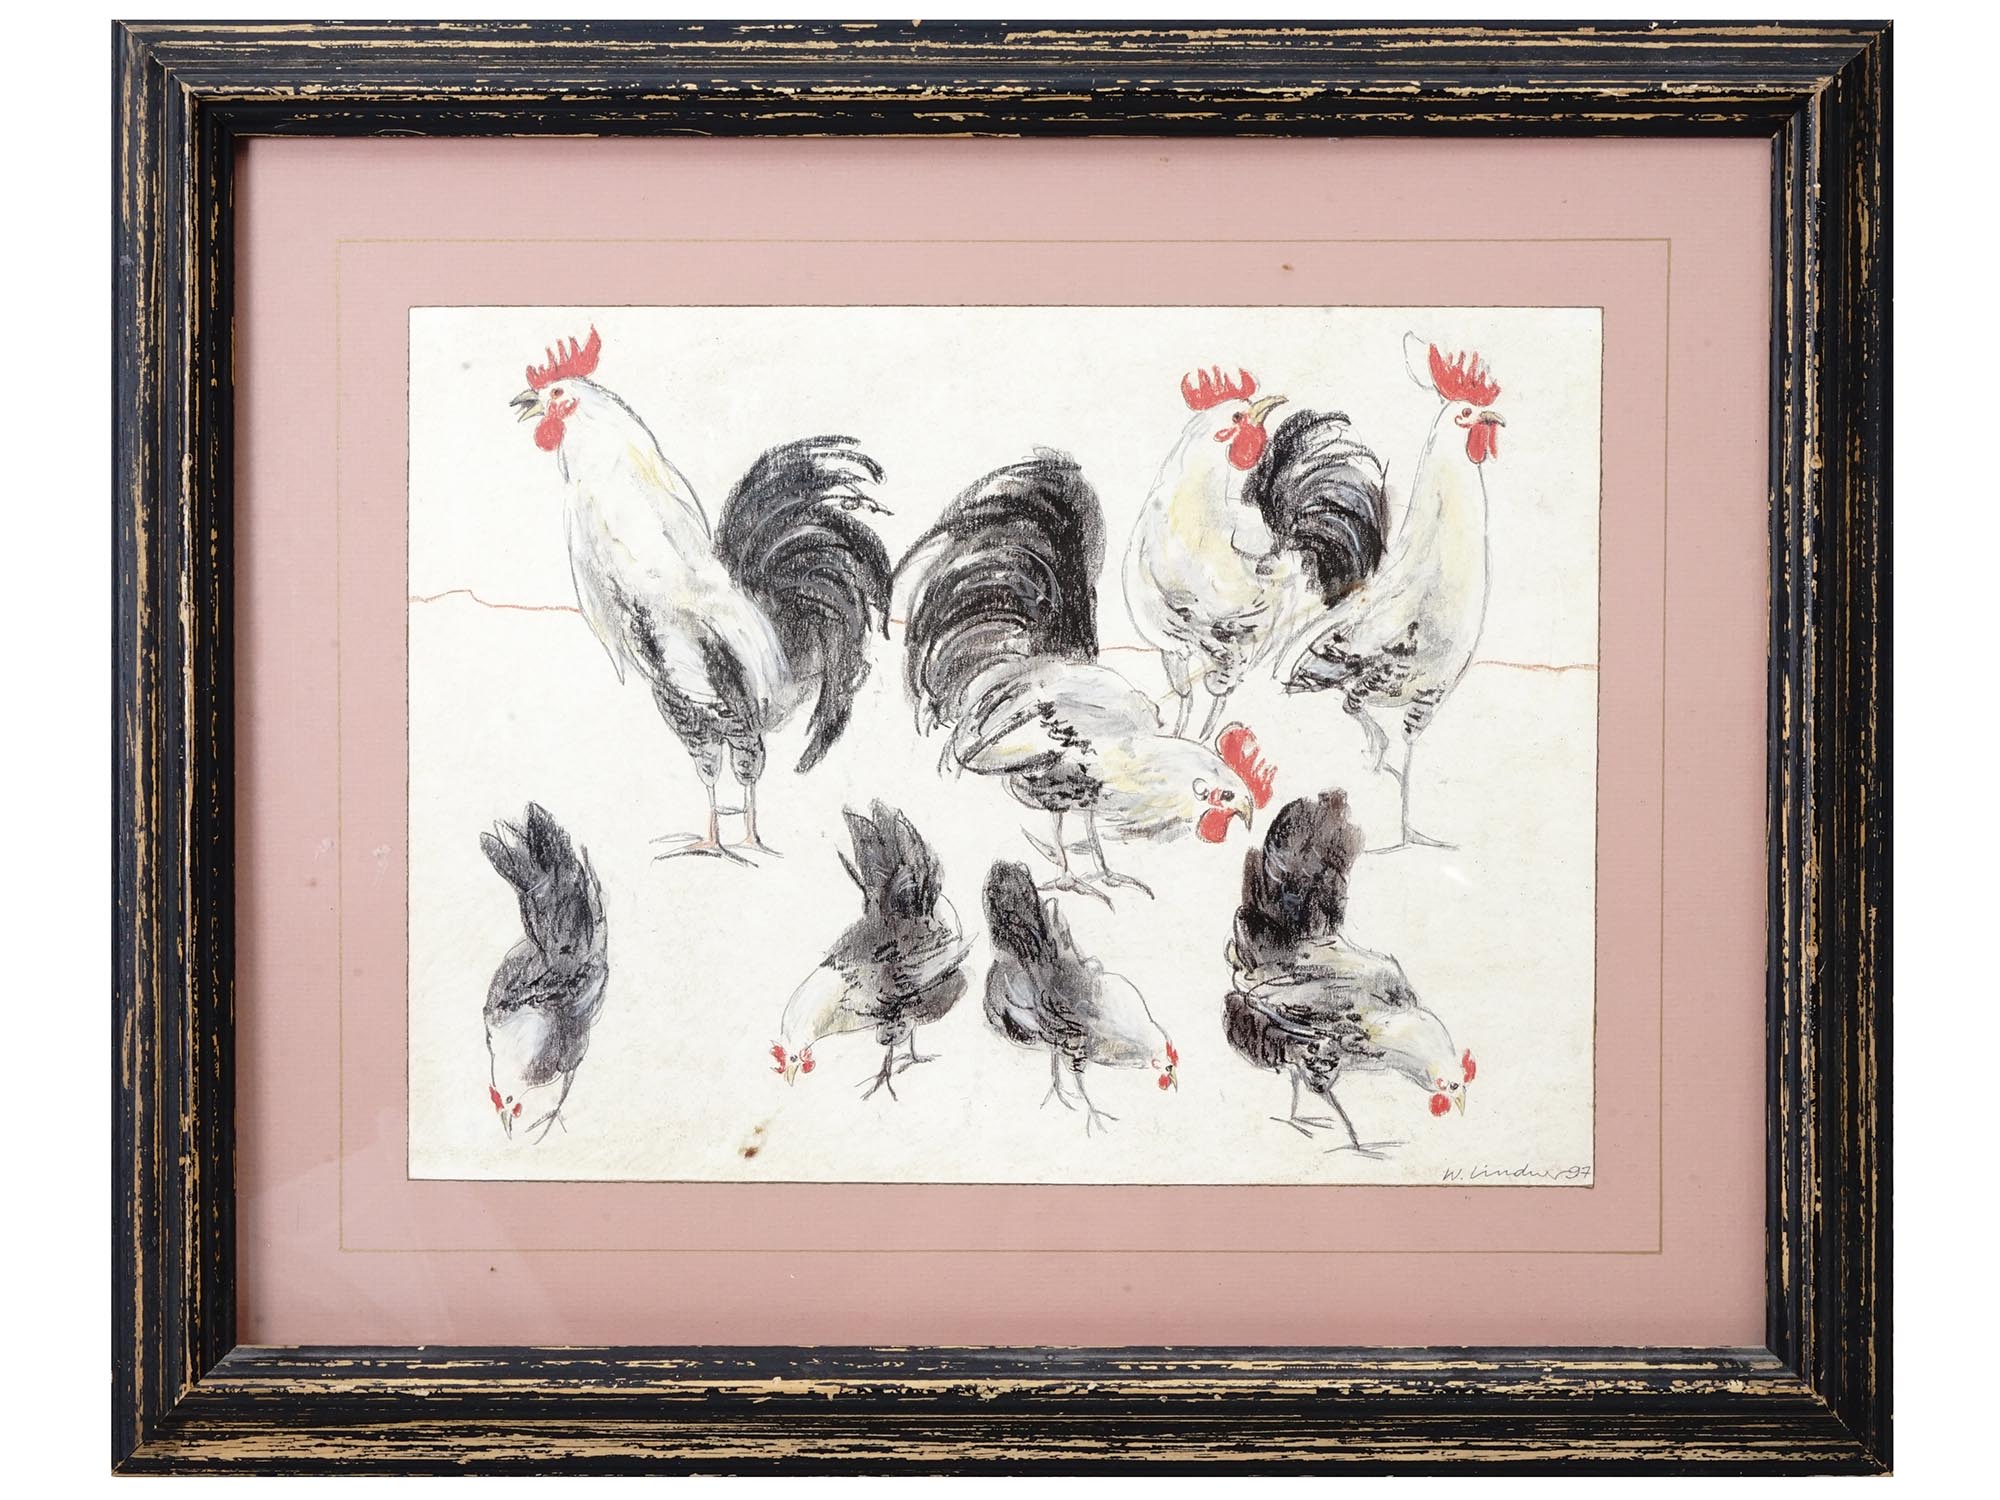 FRAMED 1990S ART PRINT OF ROOSTERS BY W. LINDNER